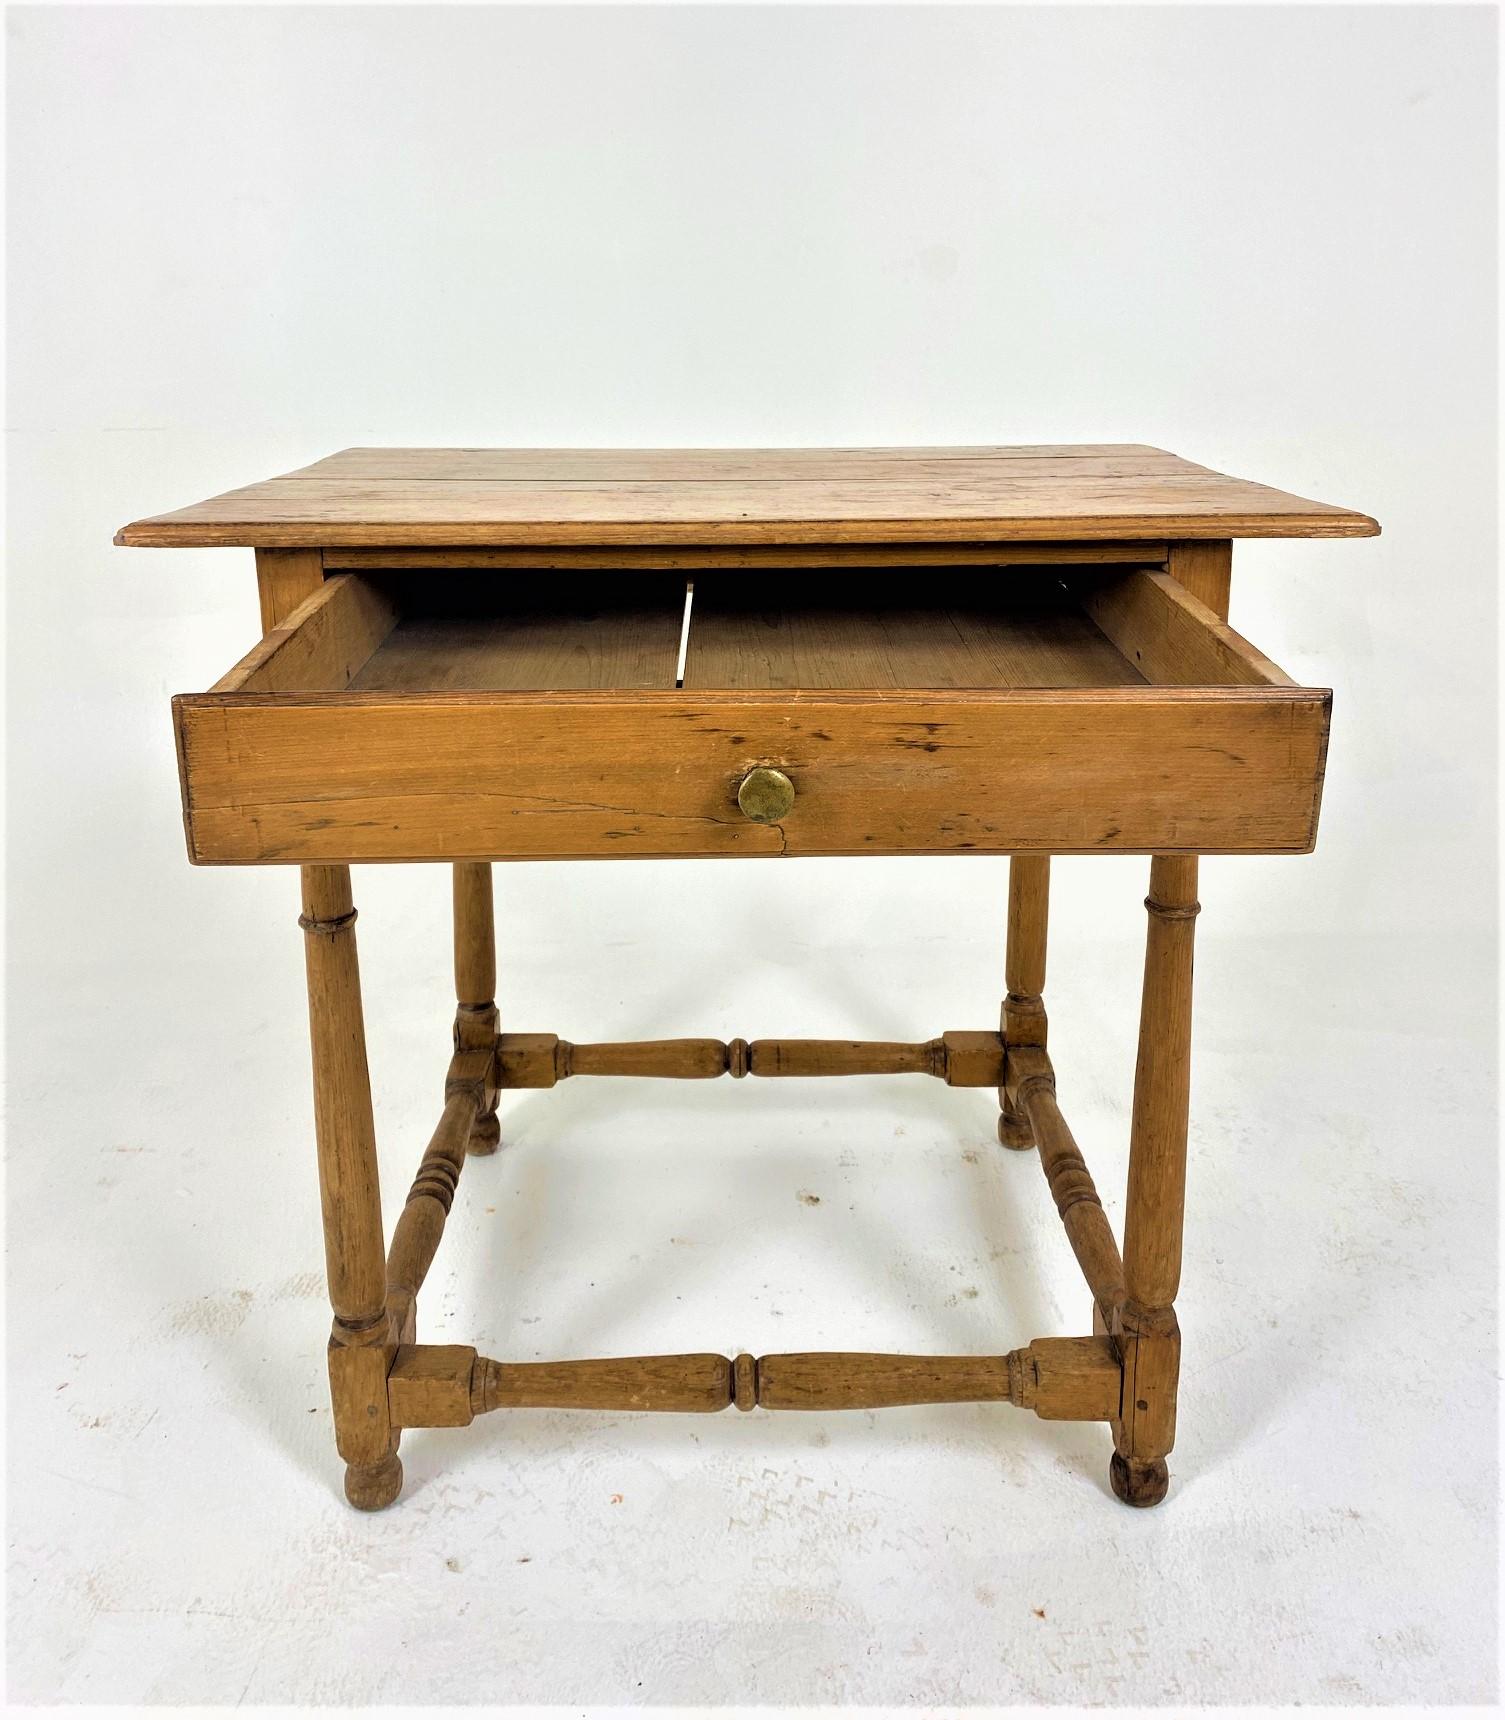 Antique pine hall table, writing table, Scotland 1880, B657

Scotland 1880
Solid Pine
Wax finish
Rectangular top with bevelled edge
Single drawer with brass knob
All standing on four turned legs
Connected by turned stretchers
Nice condition